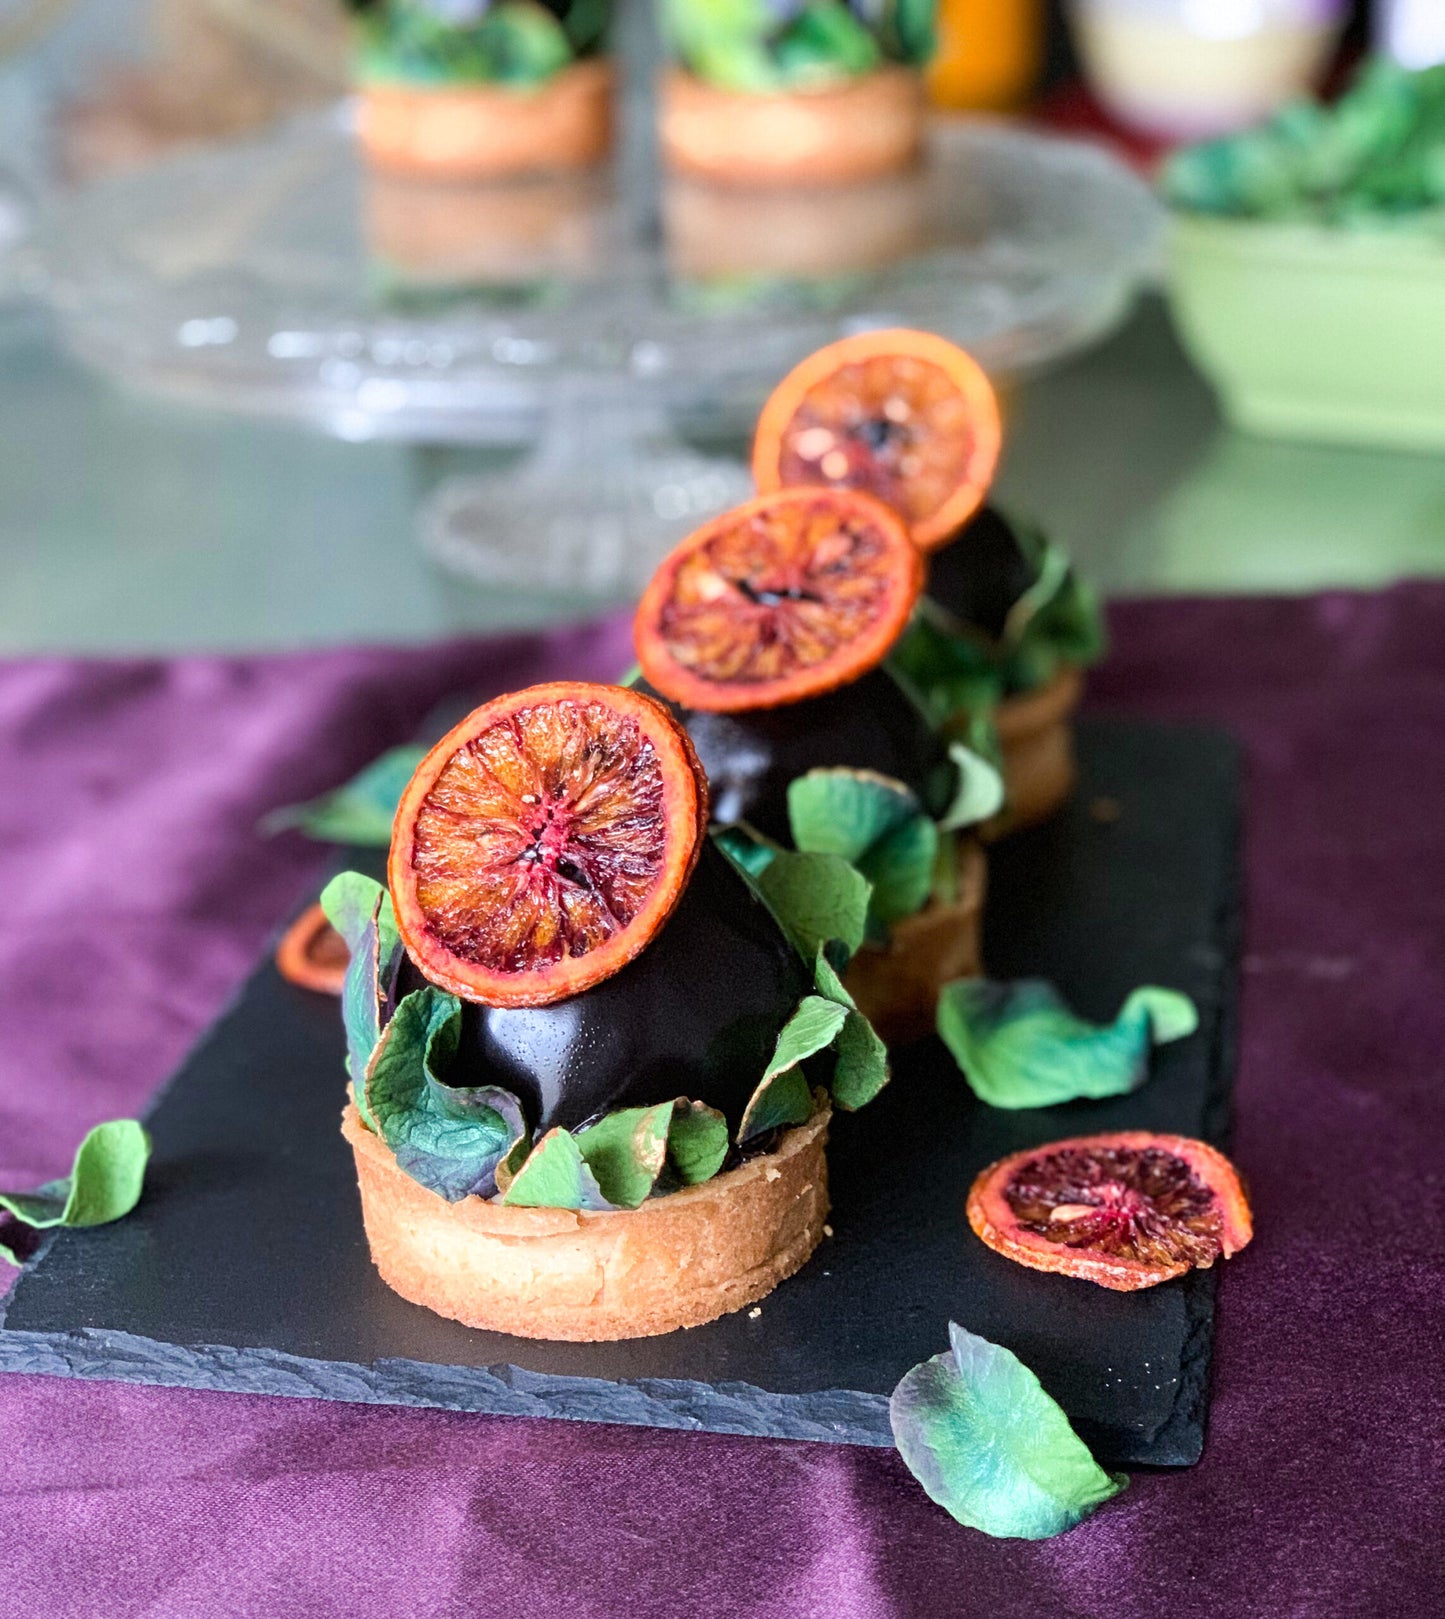 Load image into Gallery viewer, Chocolate Blood Orange Entremet
